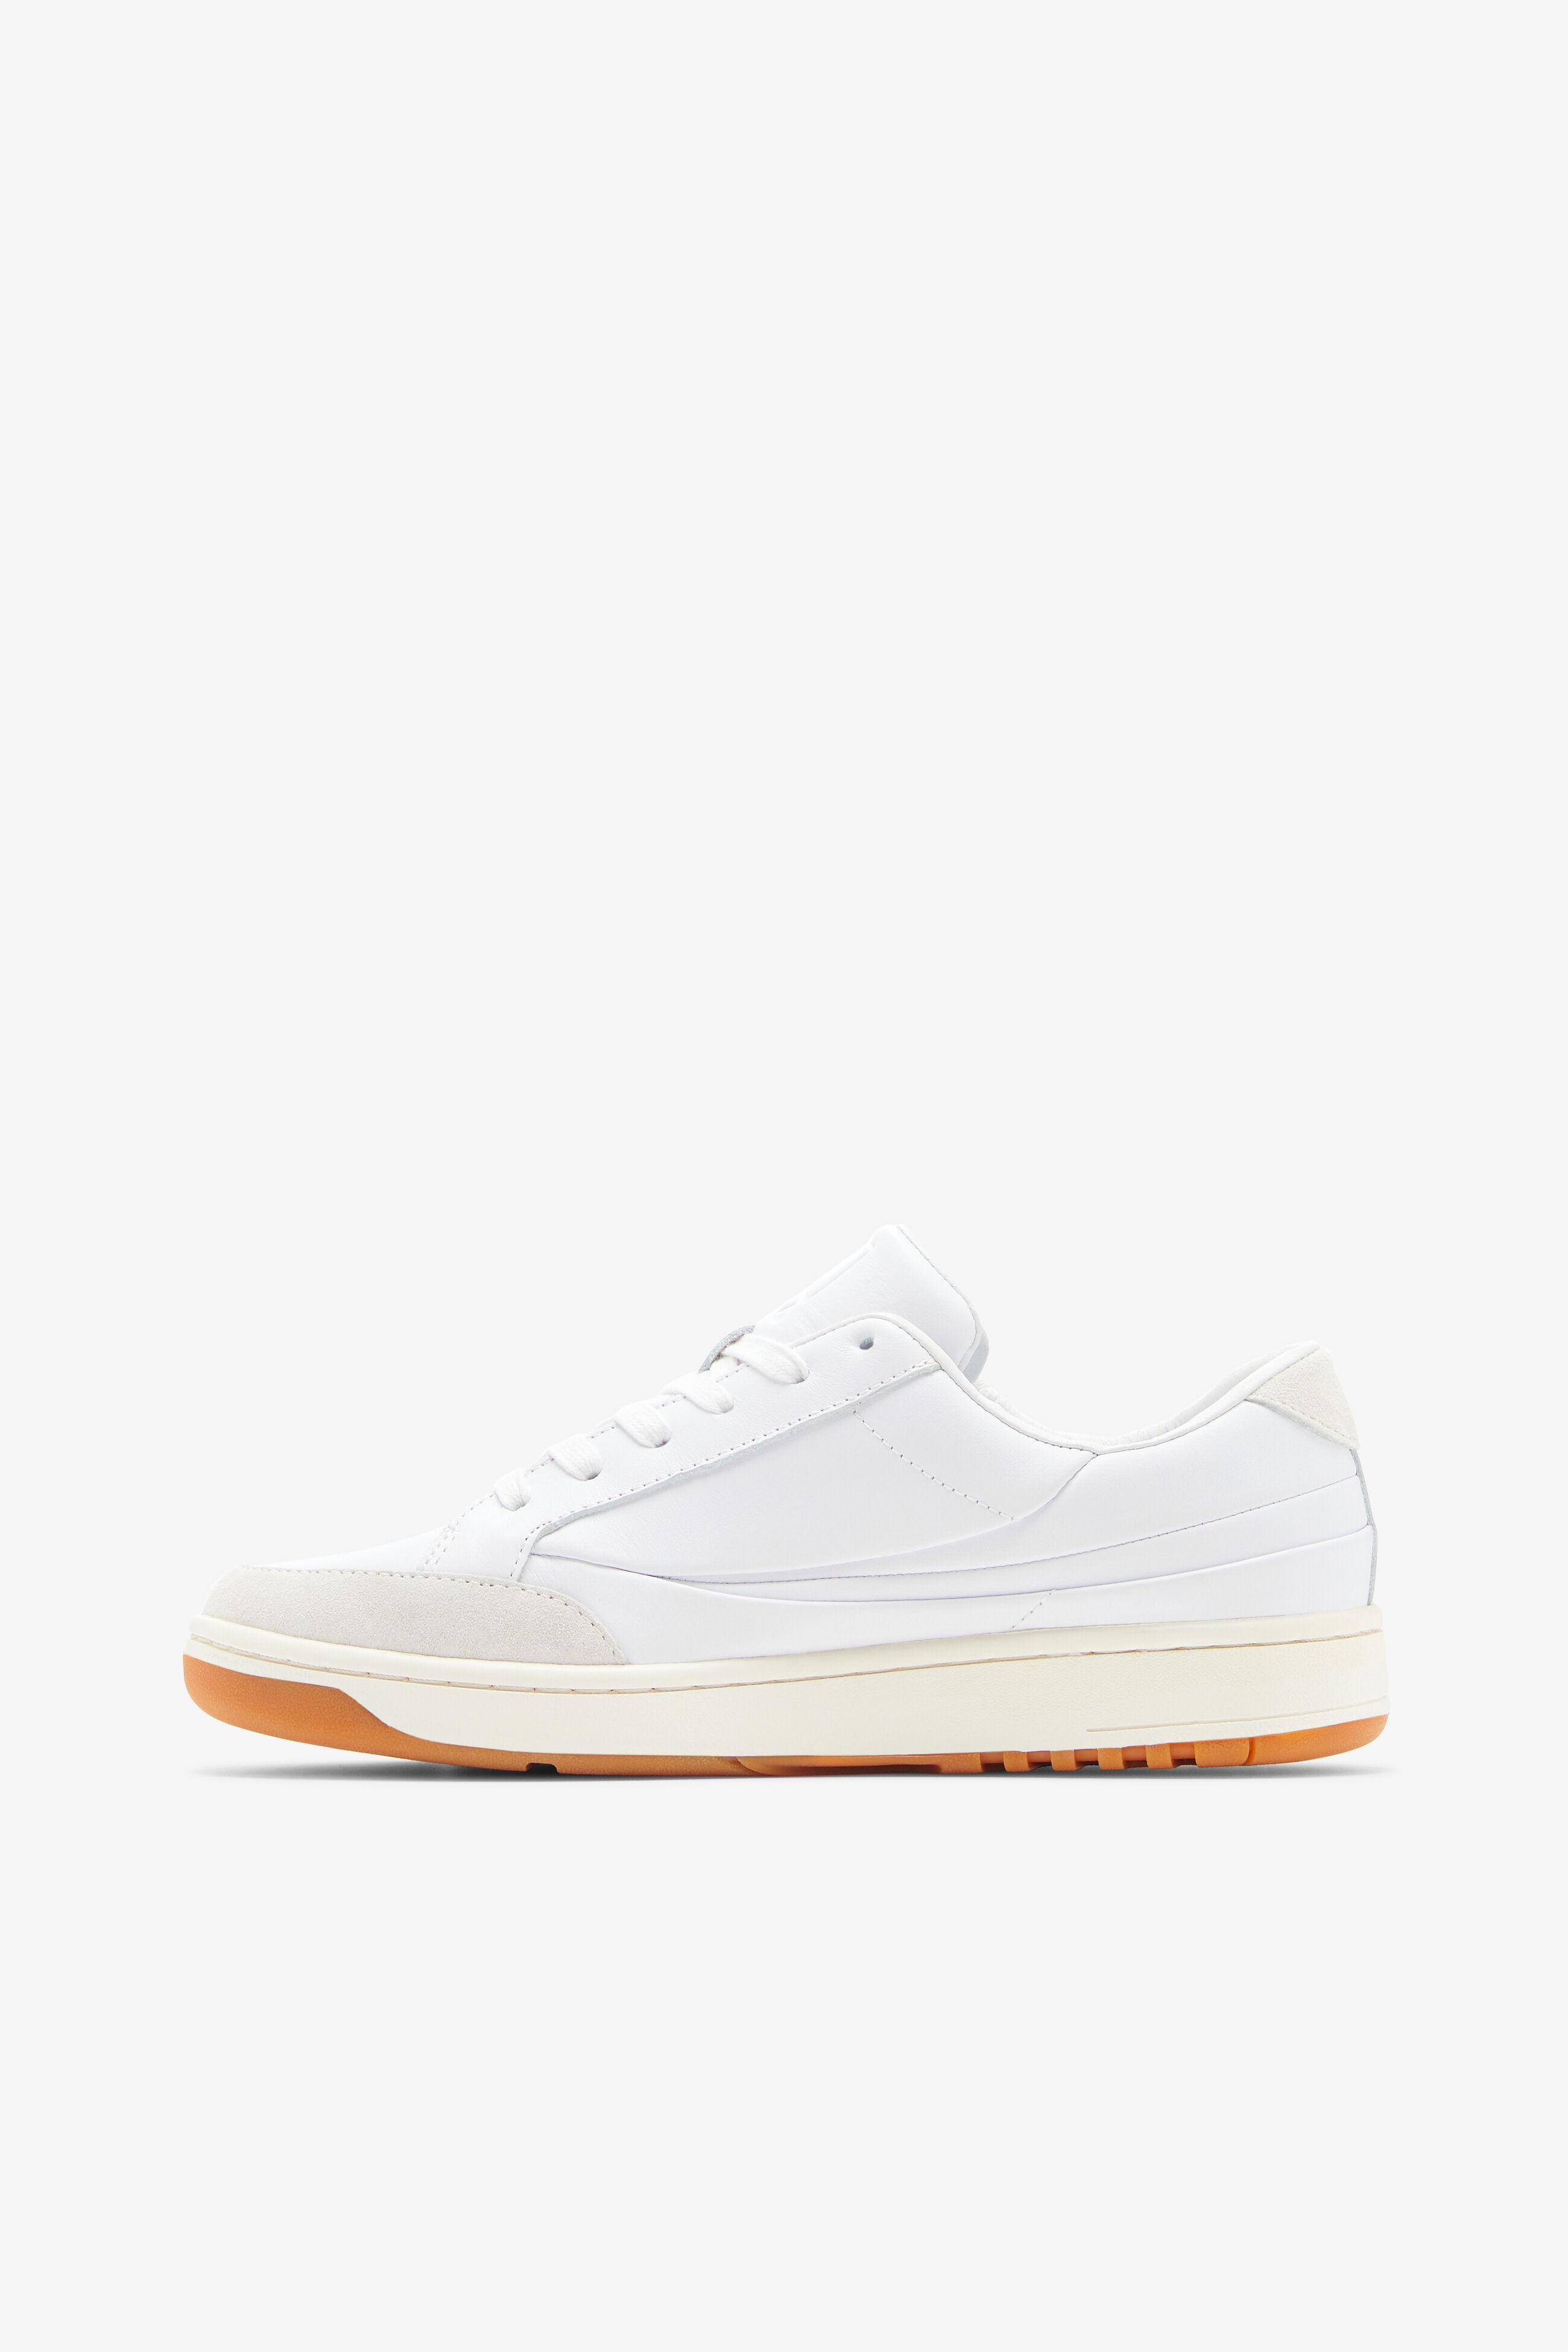 Fila Leather Lx-5 in White | Lyst